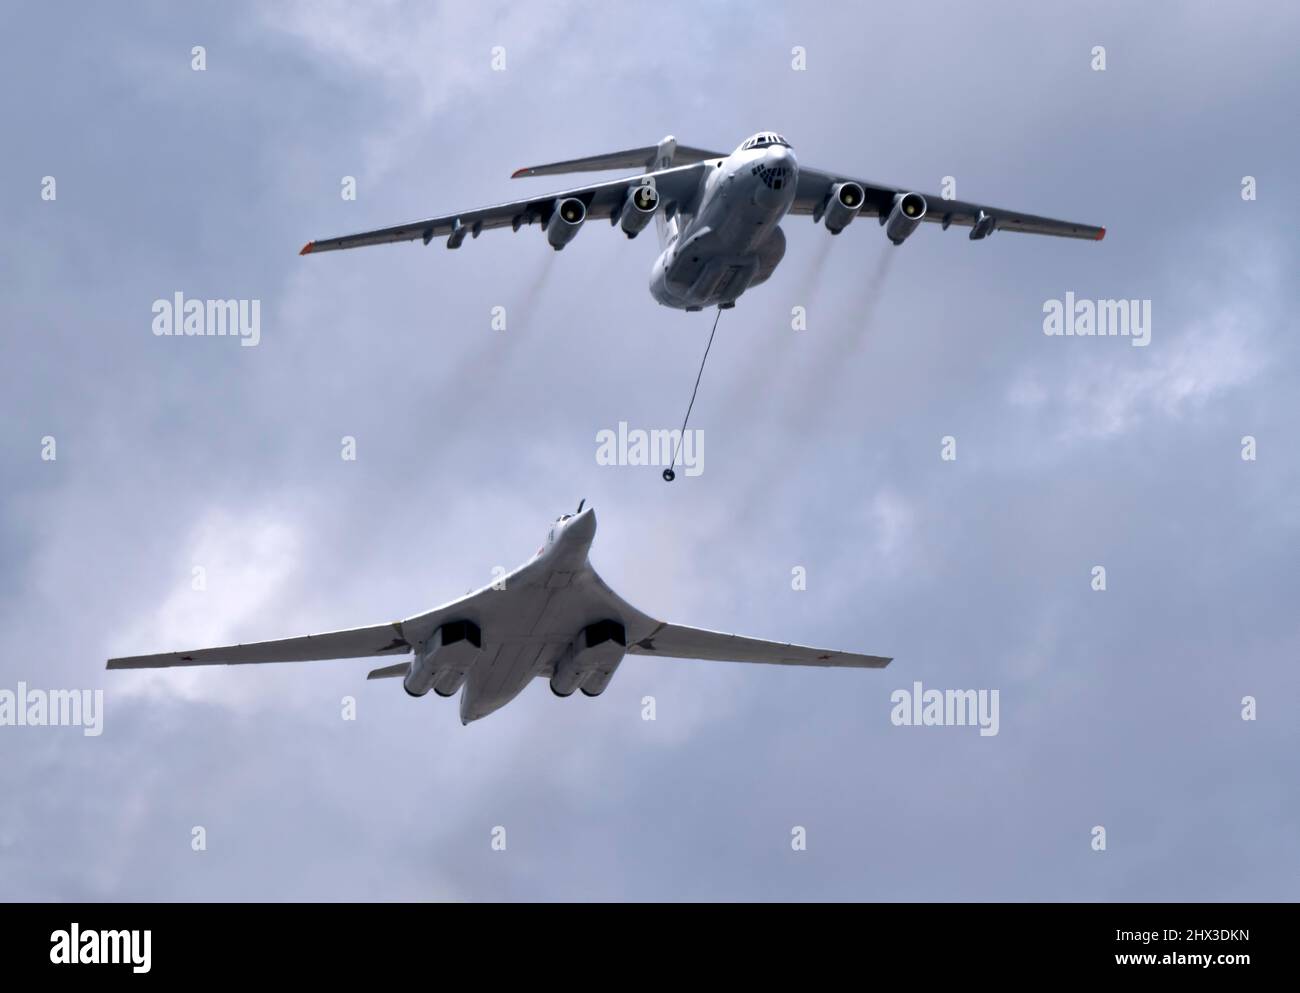 MOSCOW, RUSSIA - MAY 7, 2021: Avia parade in Moscow. tanker Ilyushin Il-78 and strategic bomber and missile platform Tu-160 in the sky on parade of Vi Stock Photo